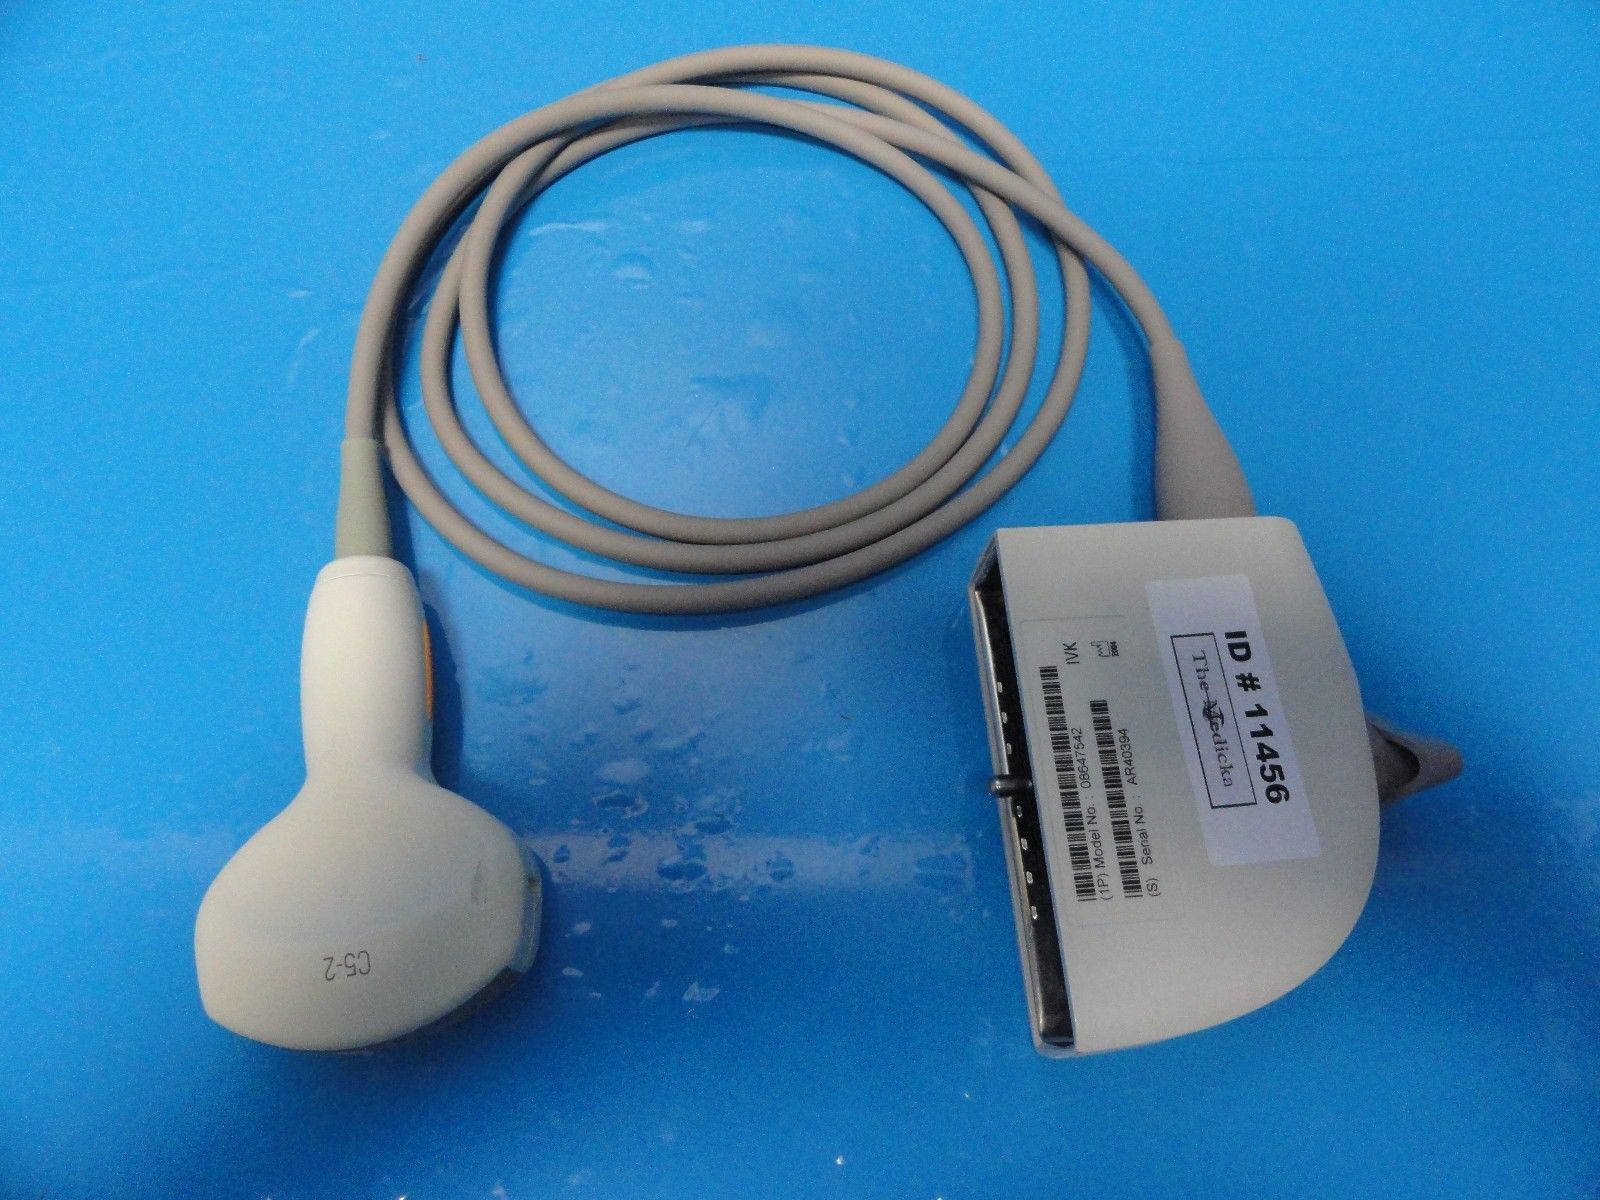 Siemens C5-2 Abdominal Currved Array Ultrasound Probe for Sonoline G20 (11456) DIAGNOSTIC ULTRASOUND MACHINES FOR SALE